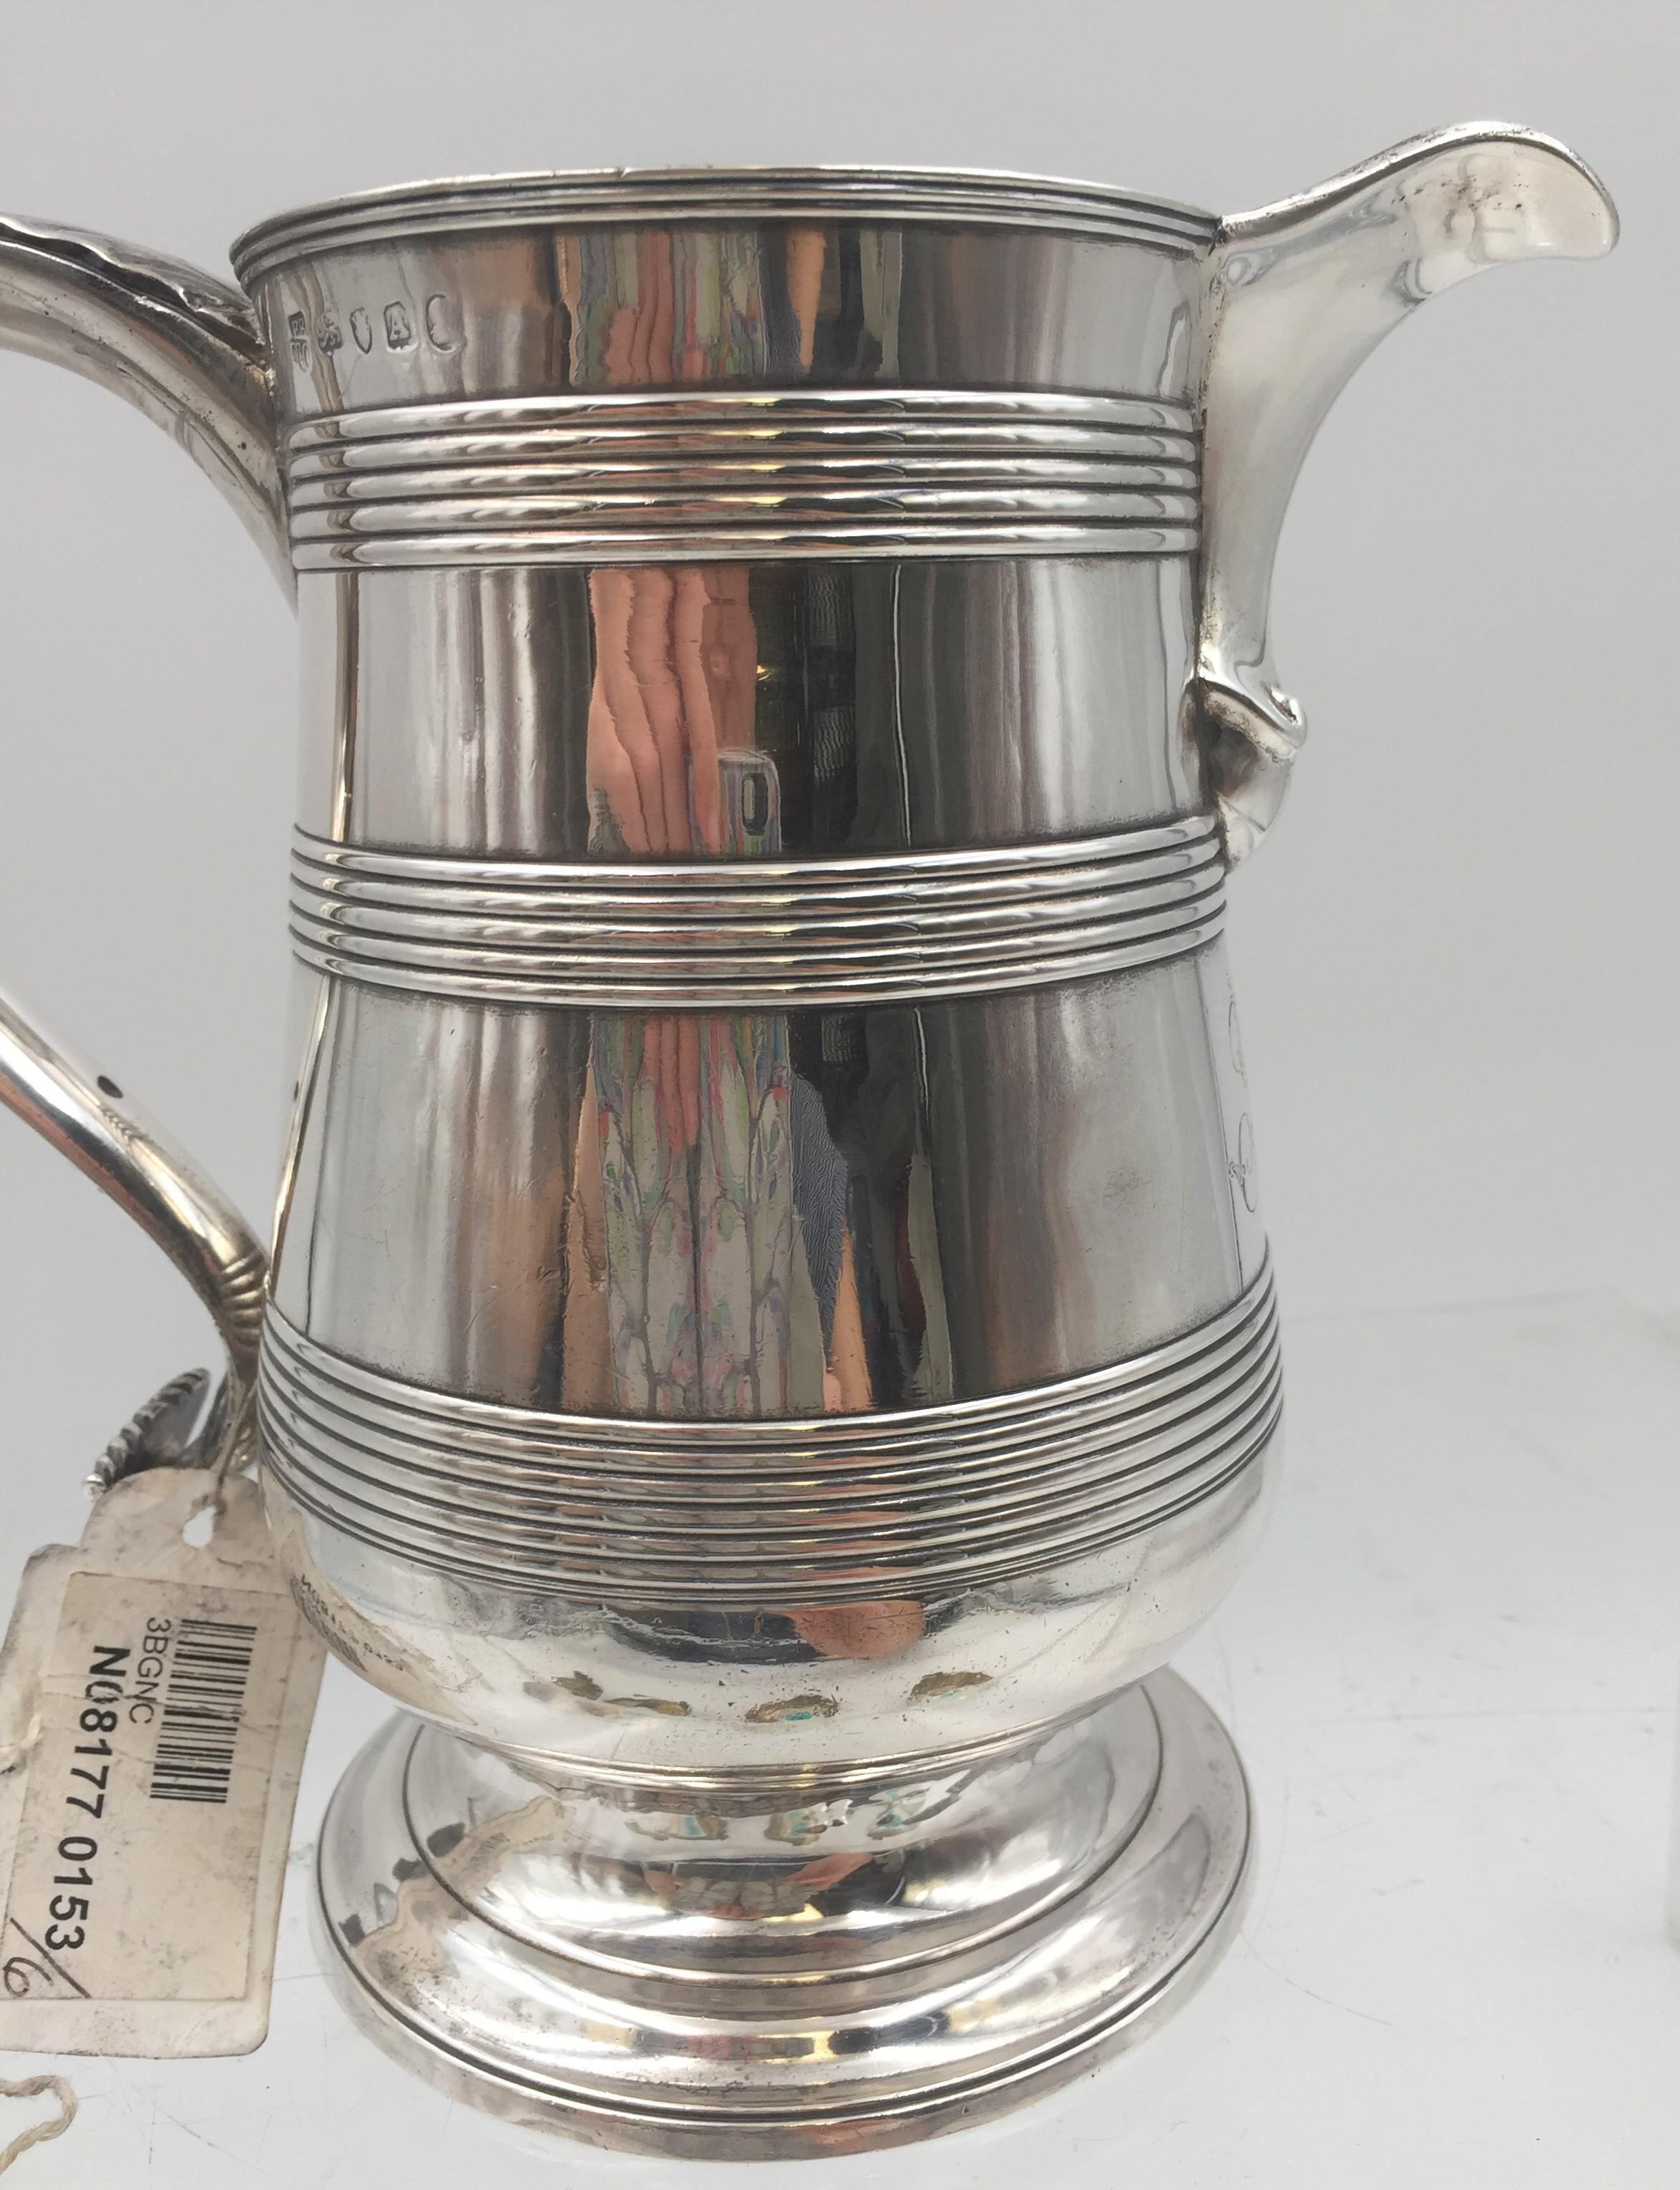 George III Bateman 1796 English Sterling Silver Spouted Beer Jug Pitcher Sold at Sotheby's